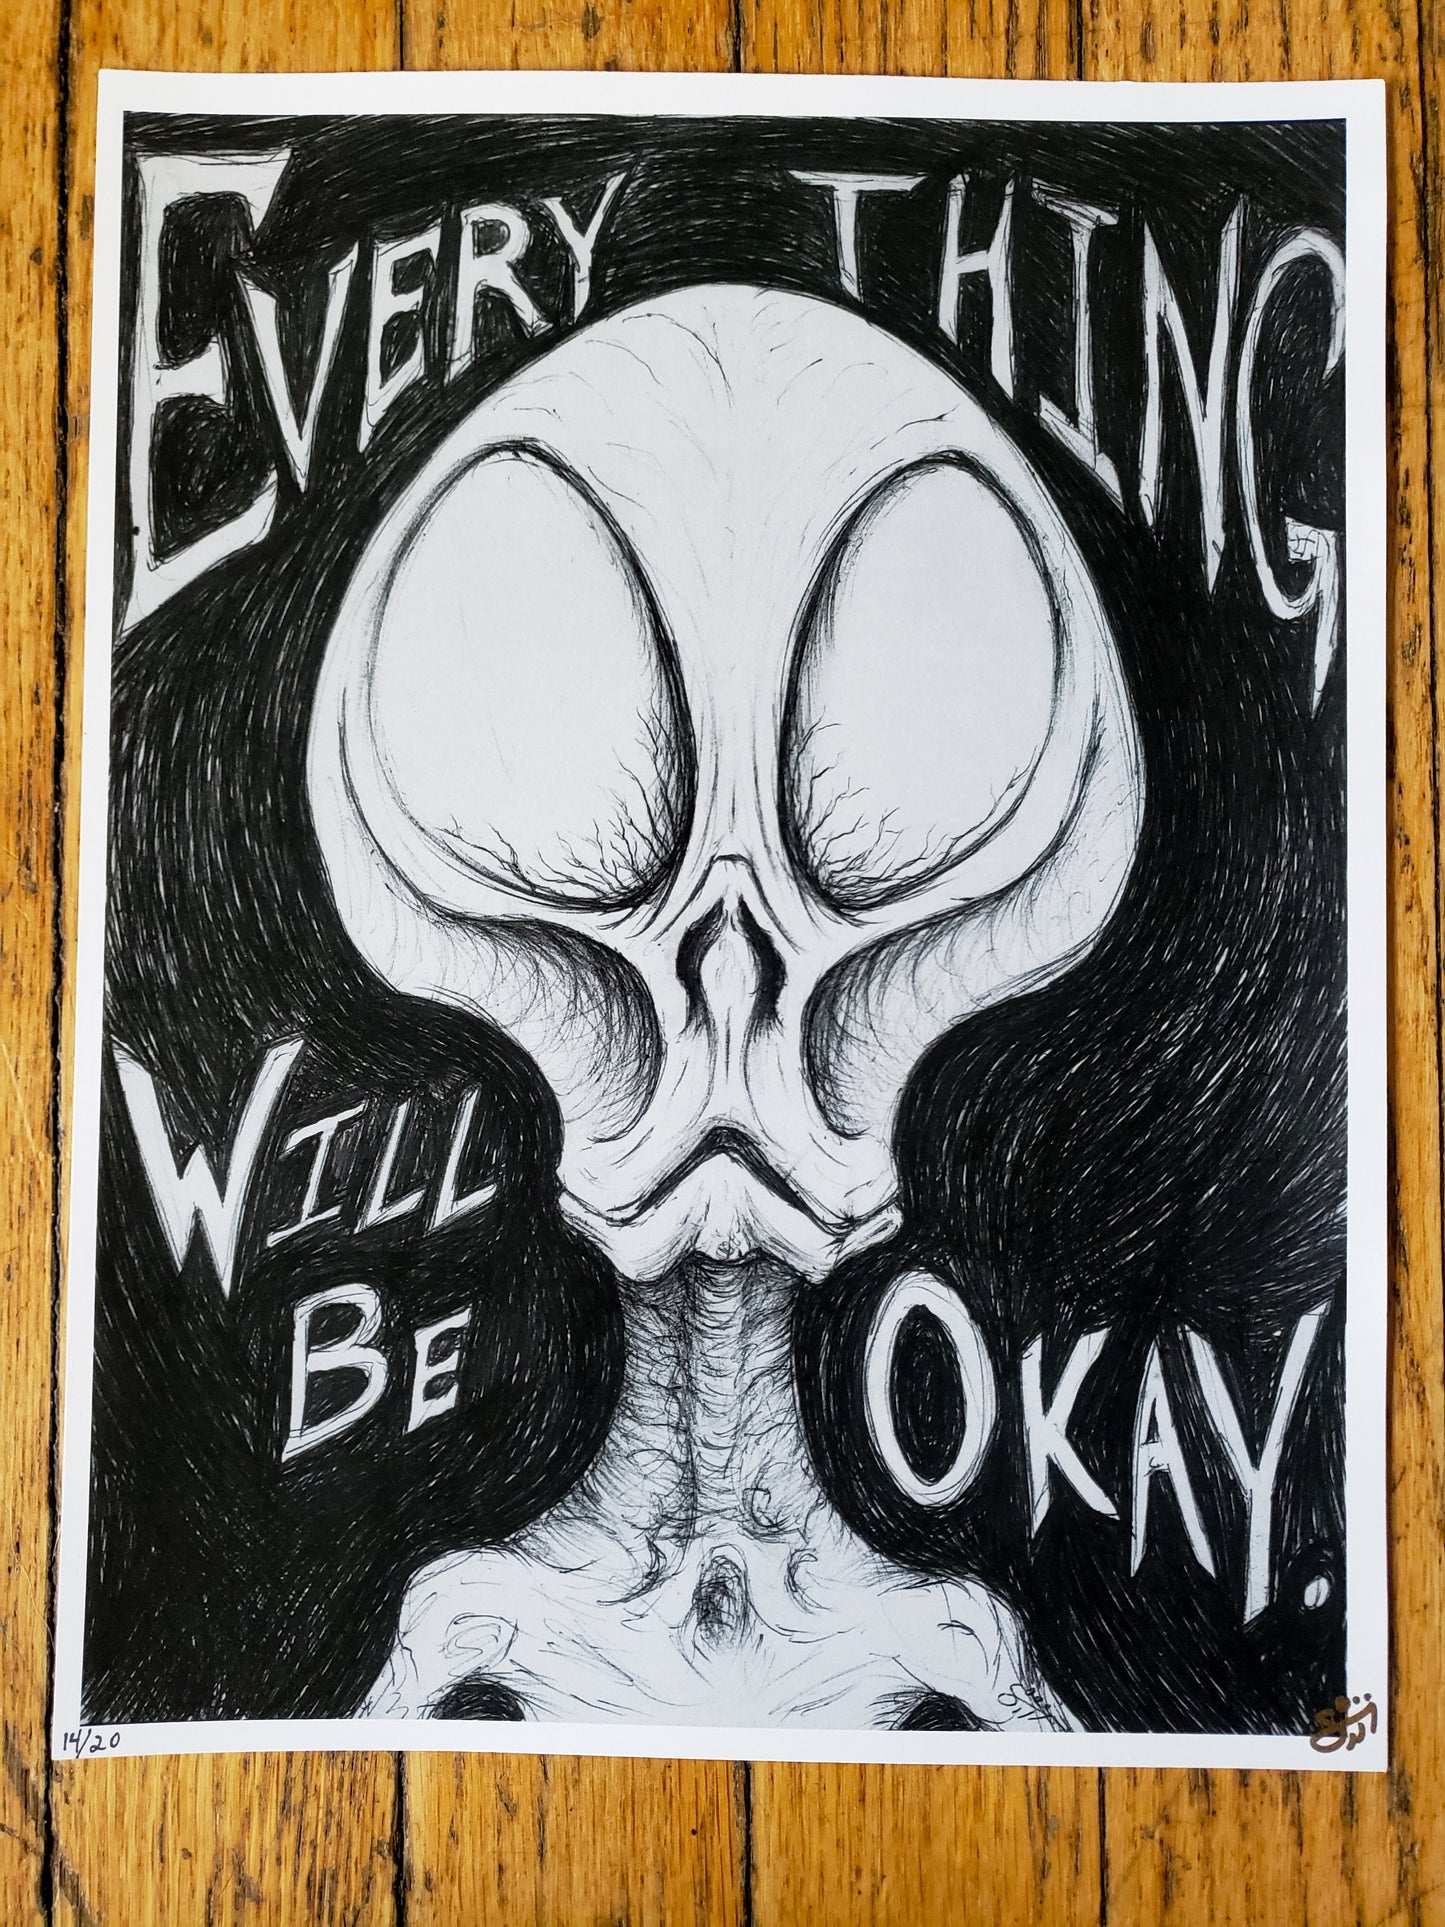 “Everything Will Be Okay” Signed 1st Edition Print